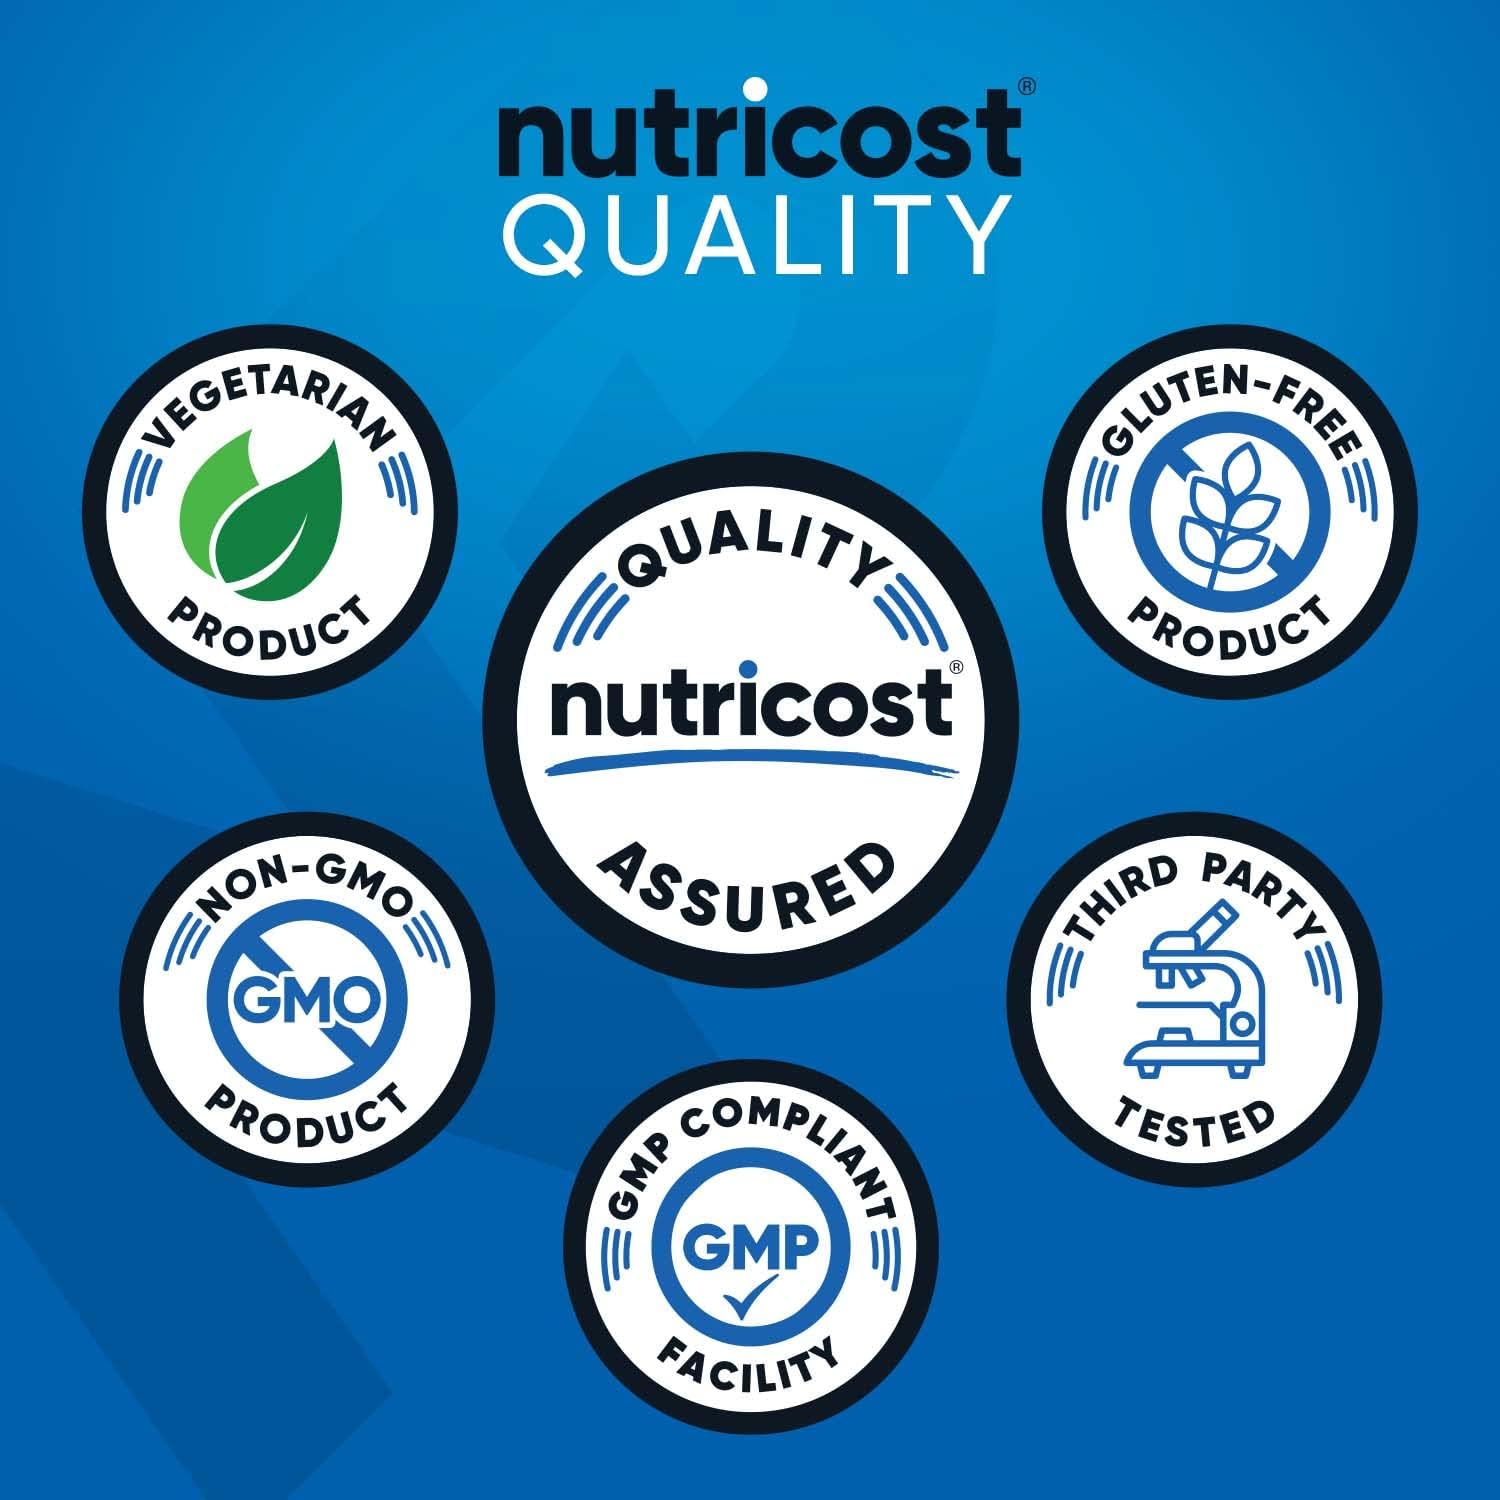 Nutricost BCAA Powder 2:1:1 (Unflavored, 90 Servings) - Bran